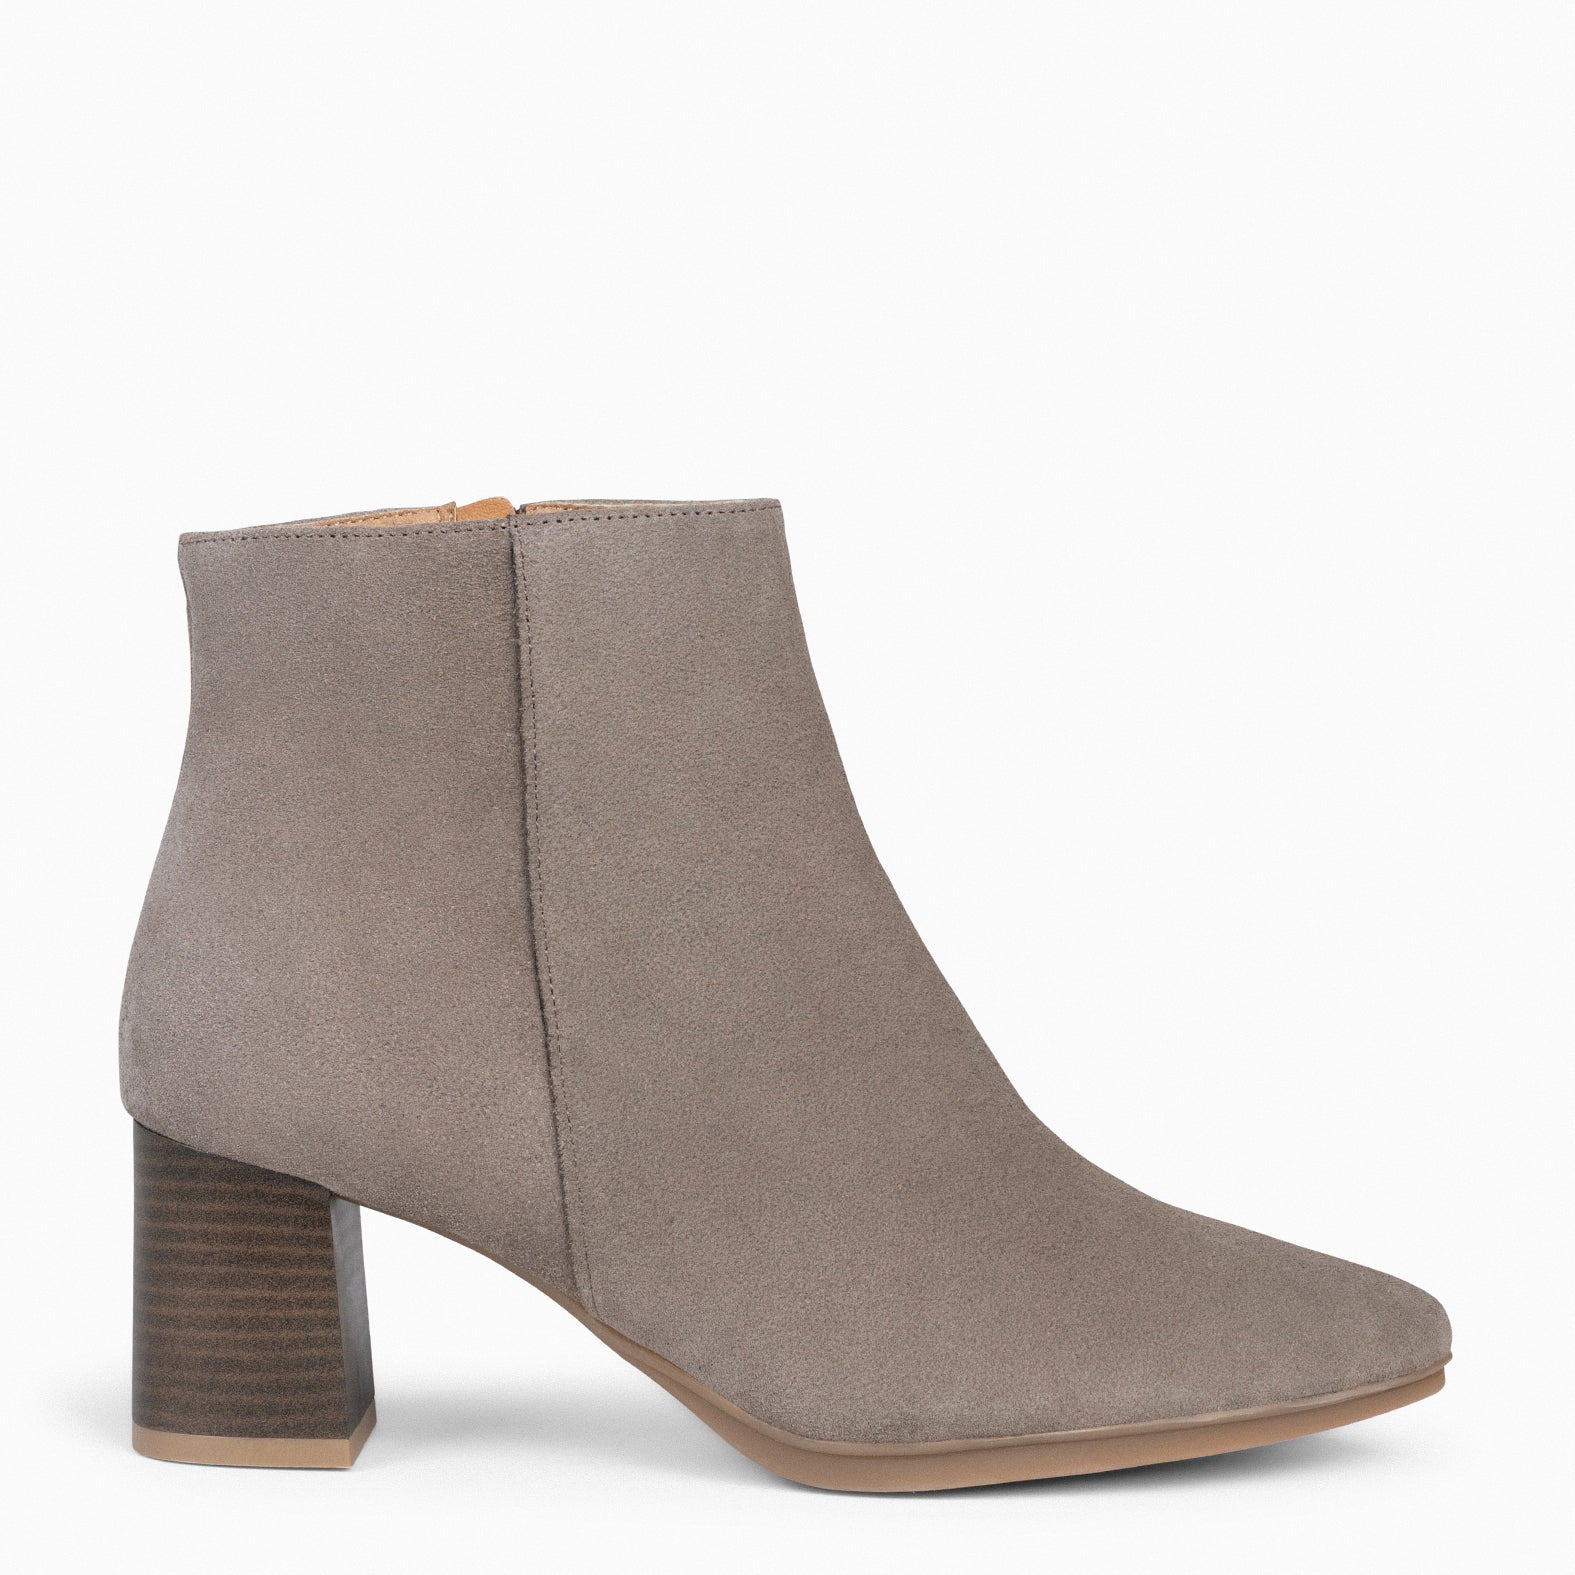 CITY - TAUPE suede leather wide heel ankle boots 